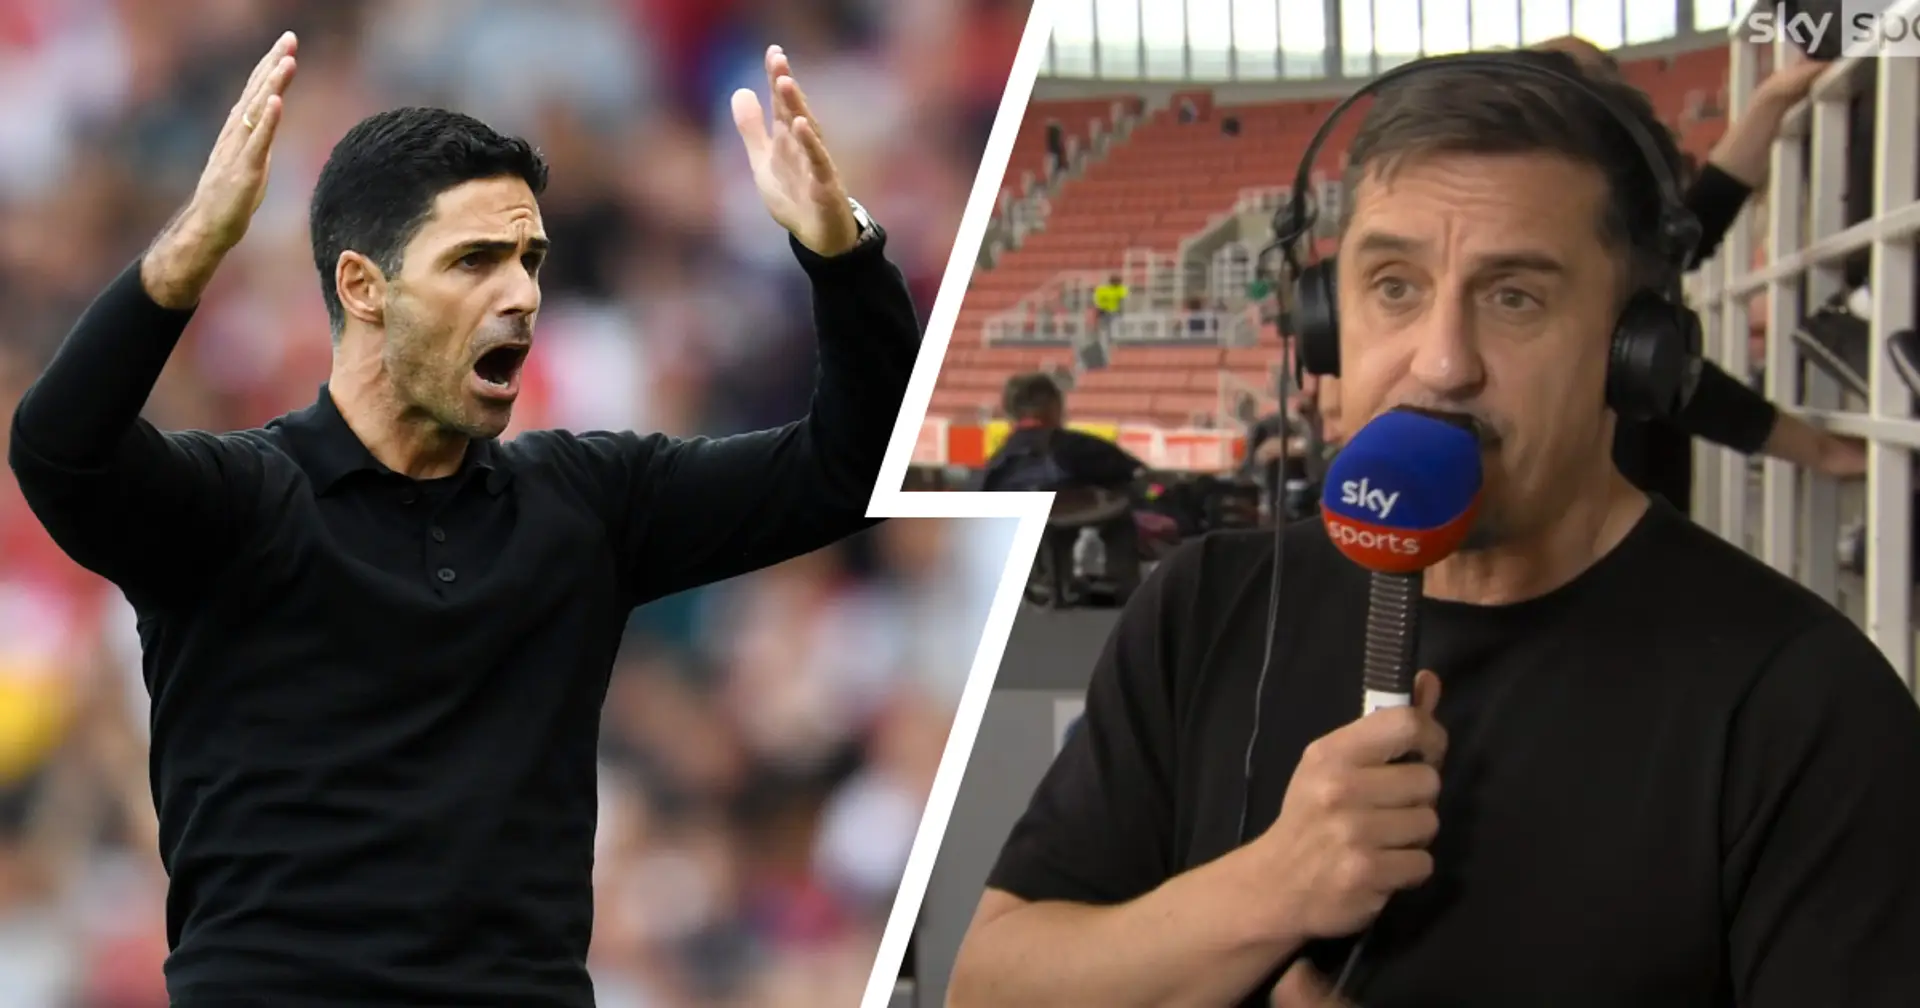 'Jumping around like you wouldn't believe': Gary Neville slams Arteta for lack of composure vs Spurs